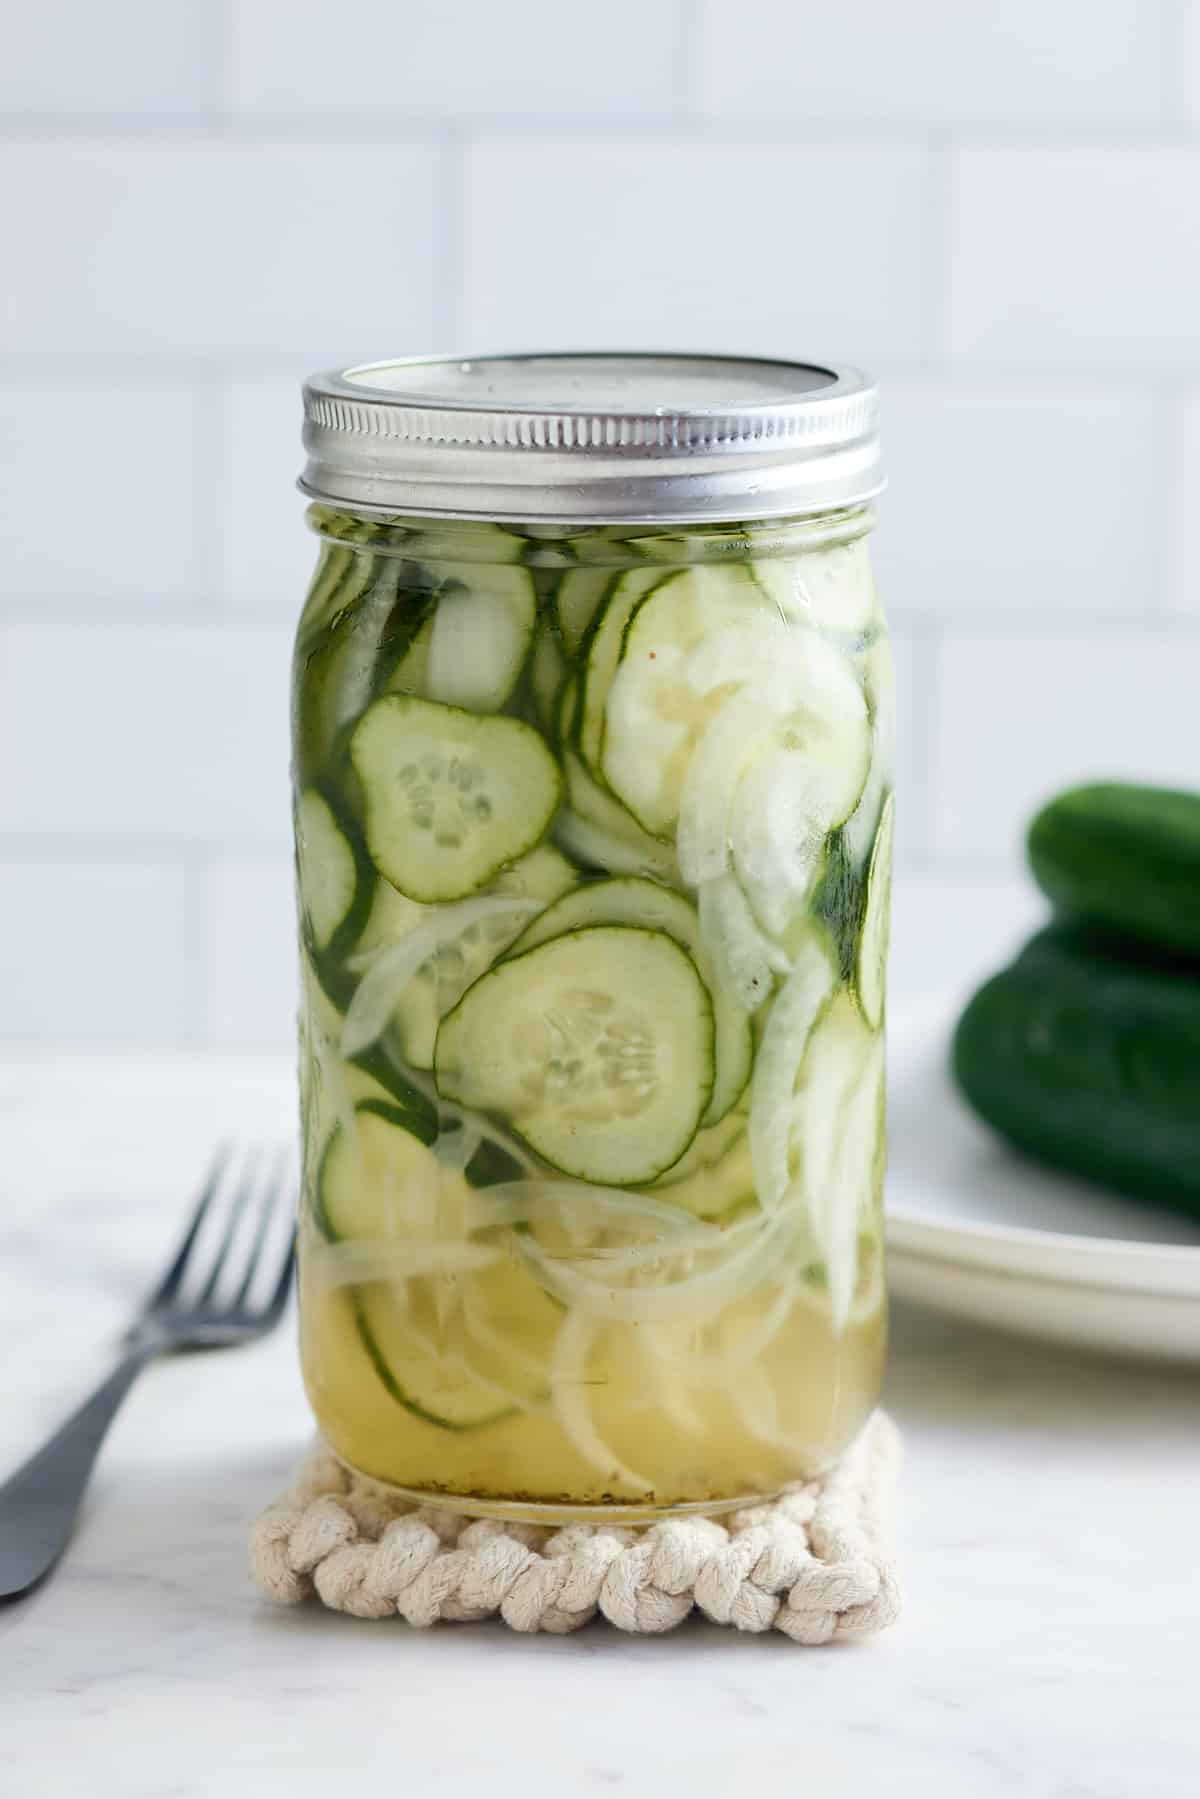 Mason jar filled with cucumber and sweet onion refrigerator pickles